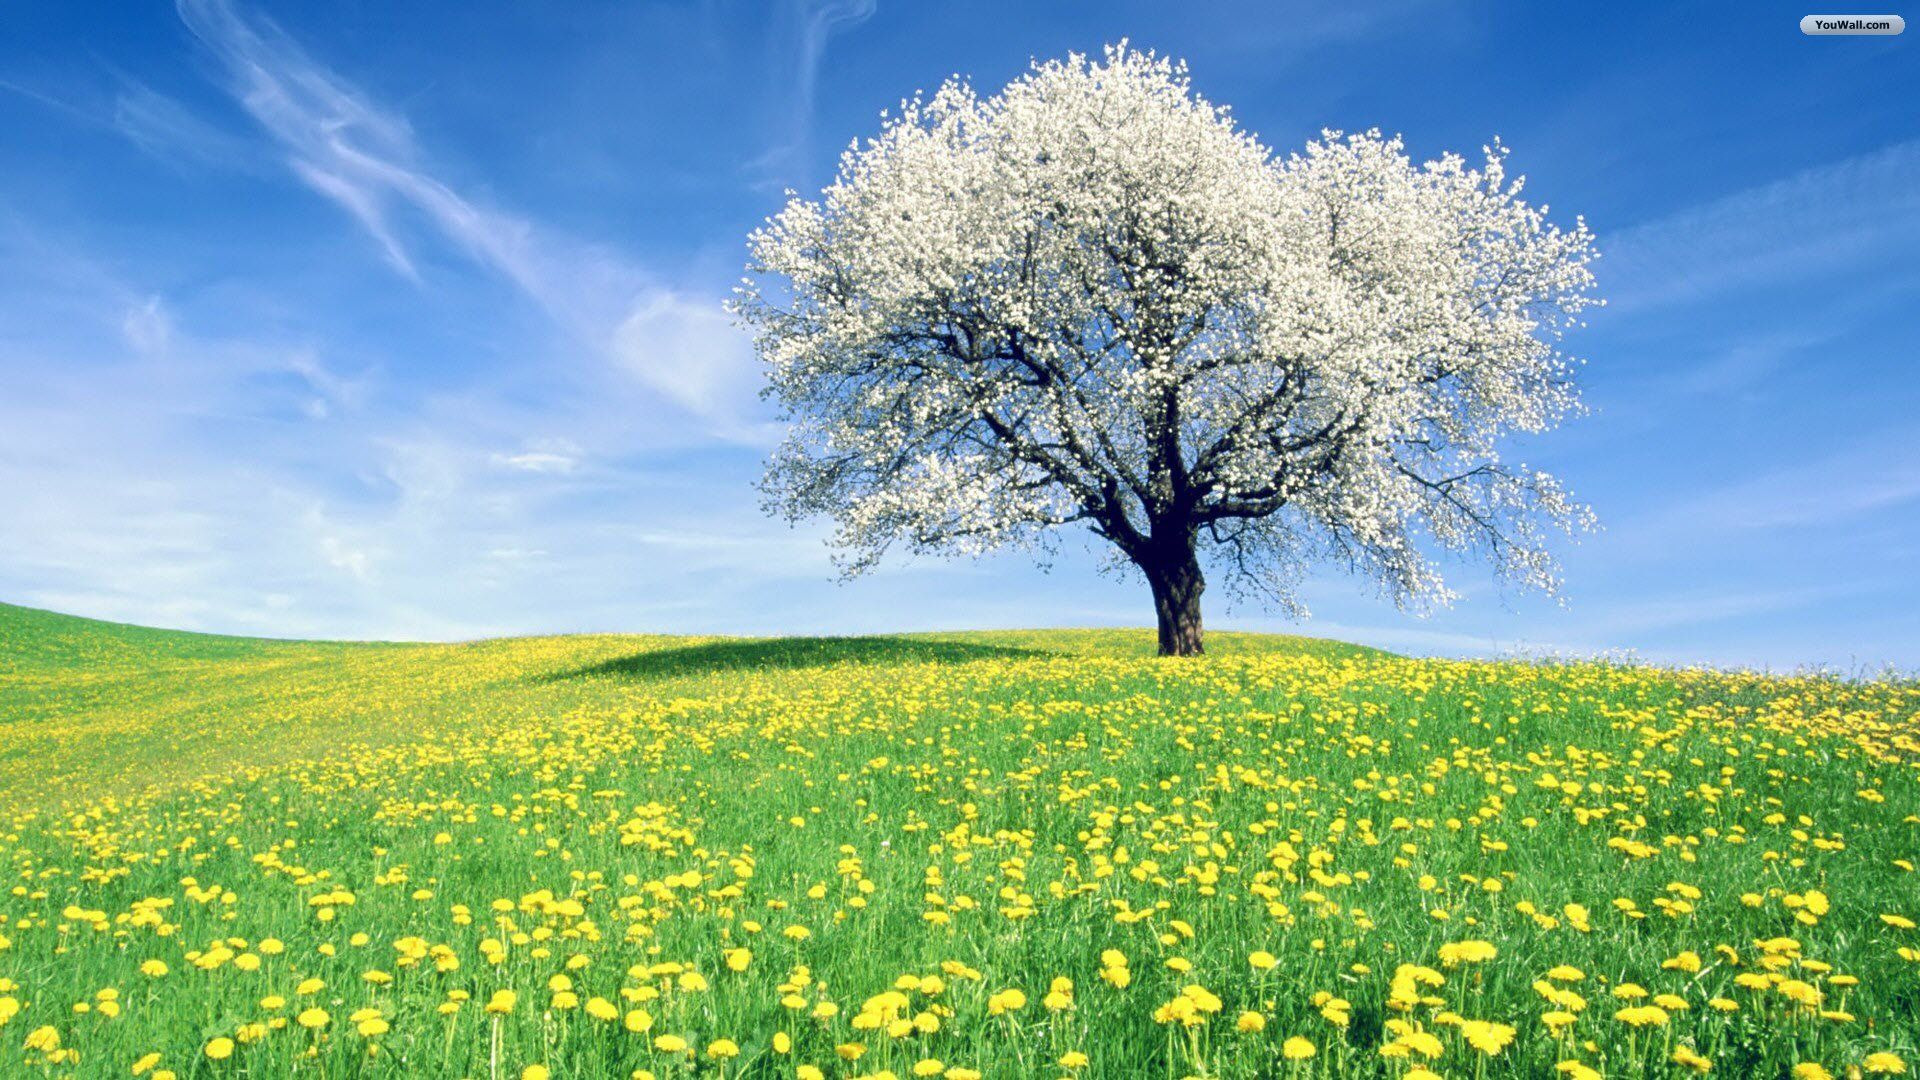 Spring Tree Google Search Landscape Trees Nature